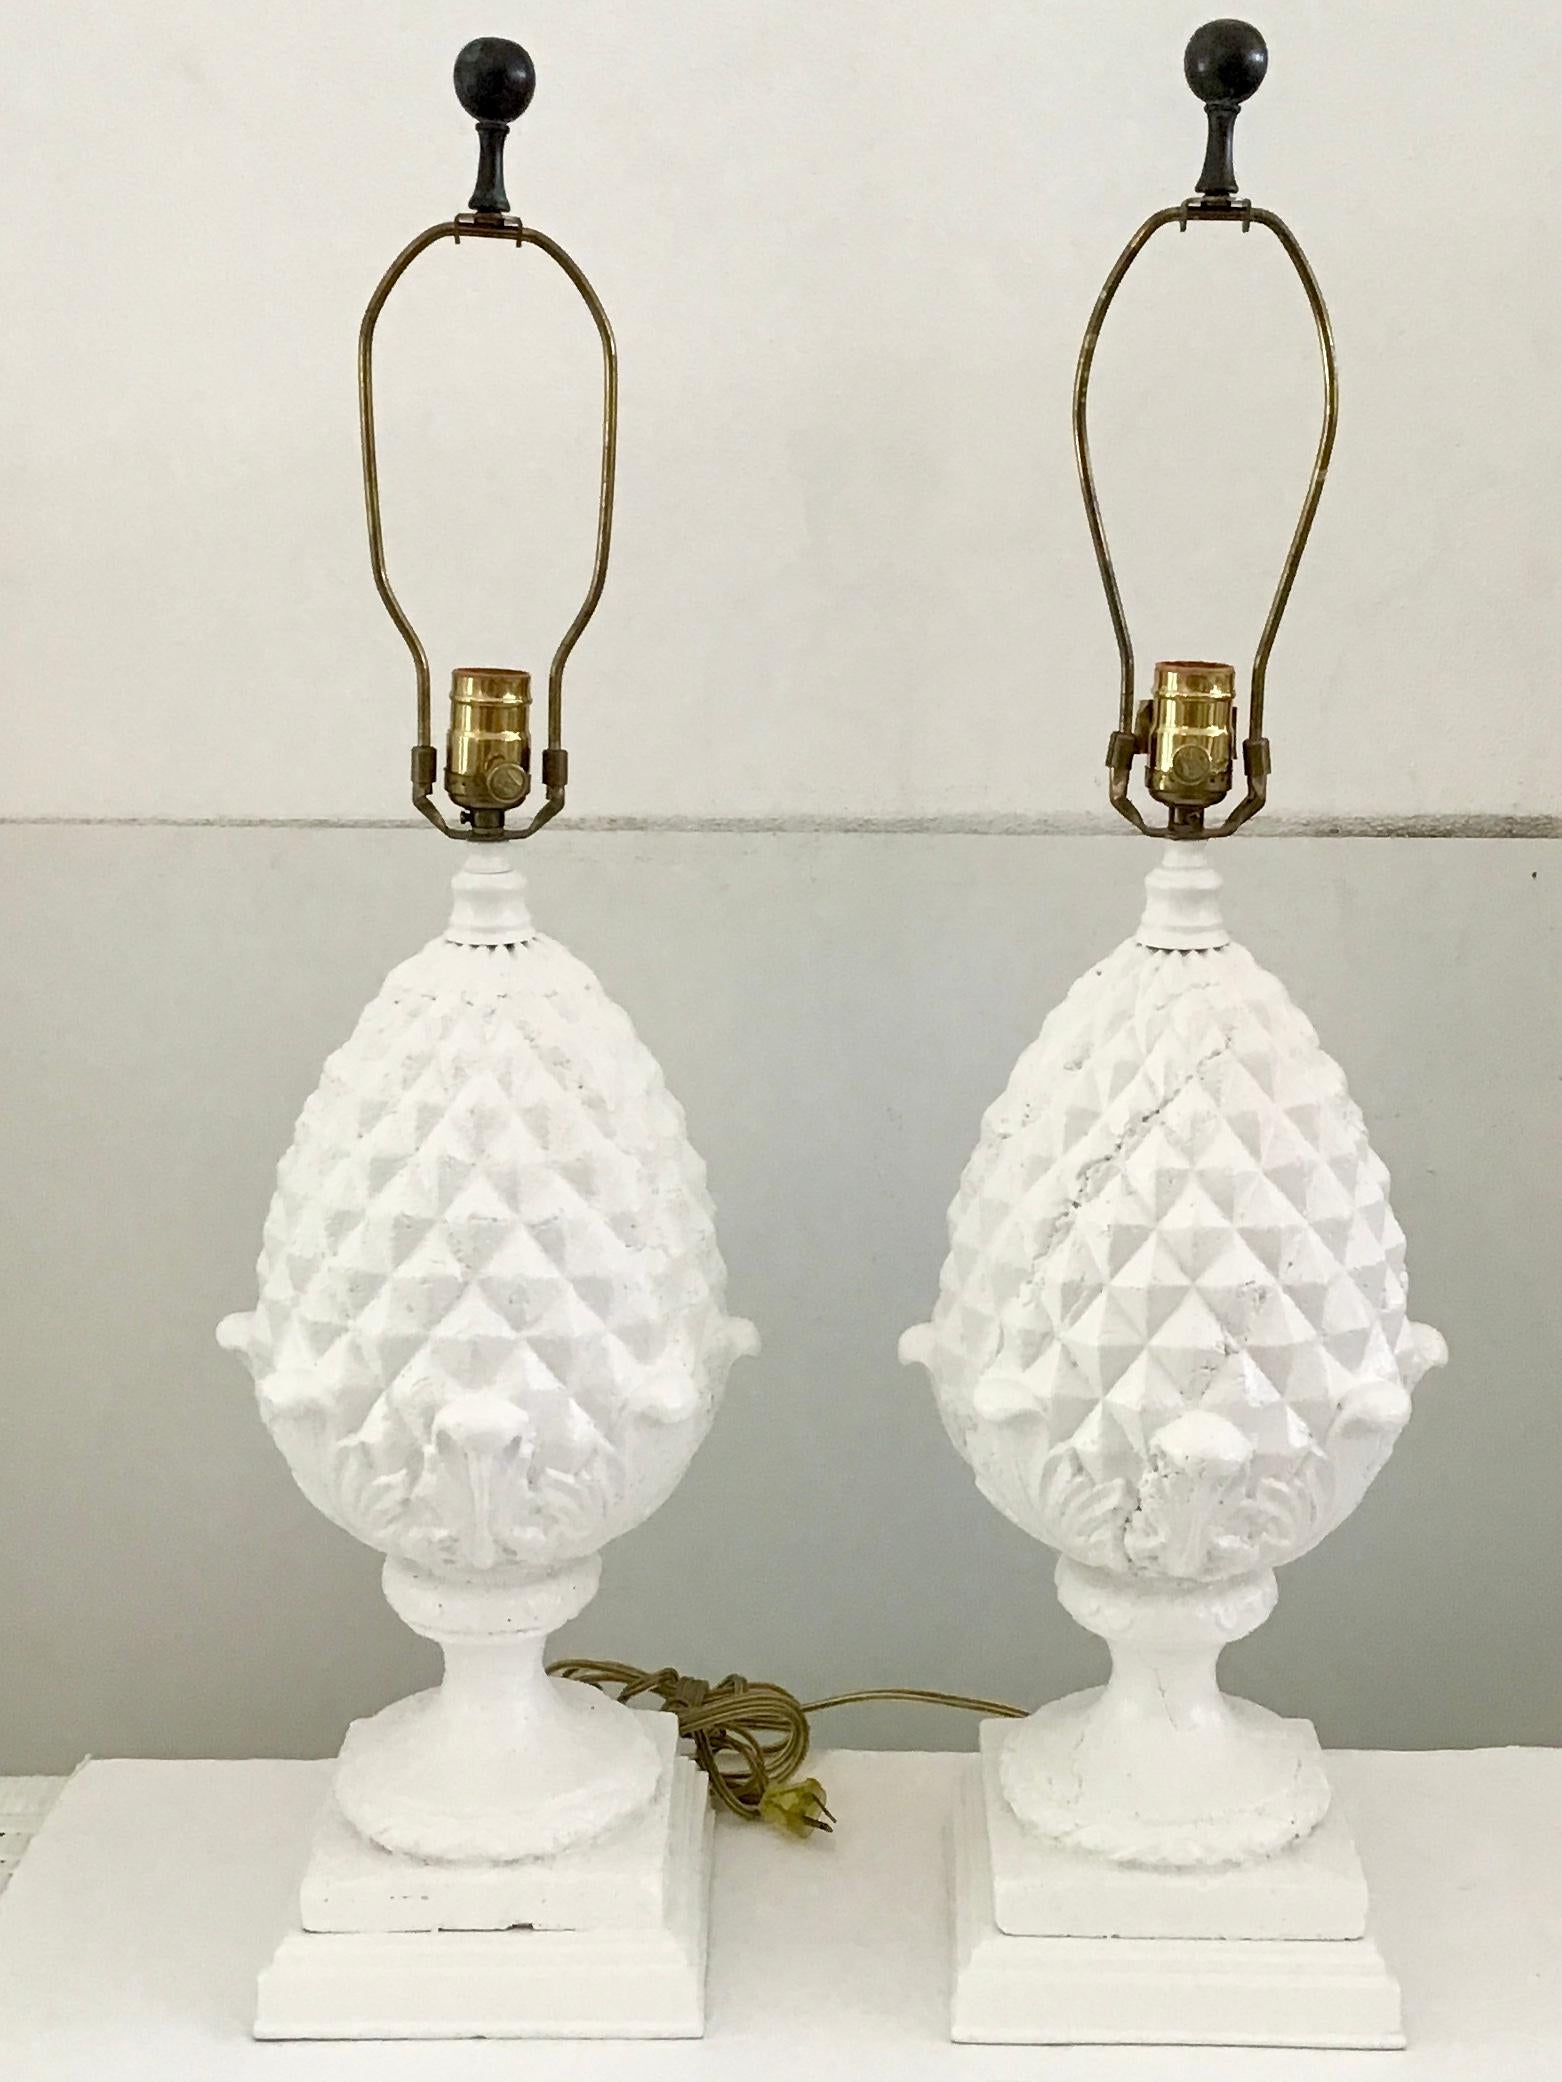 Modern Pineapple Table Lamps in Fresh White Finish, a Pair For Sale